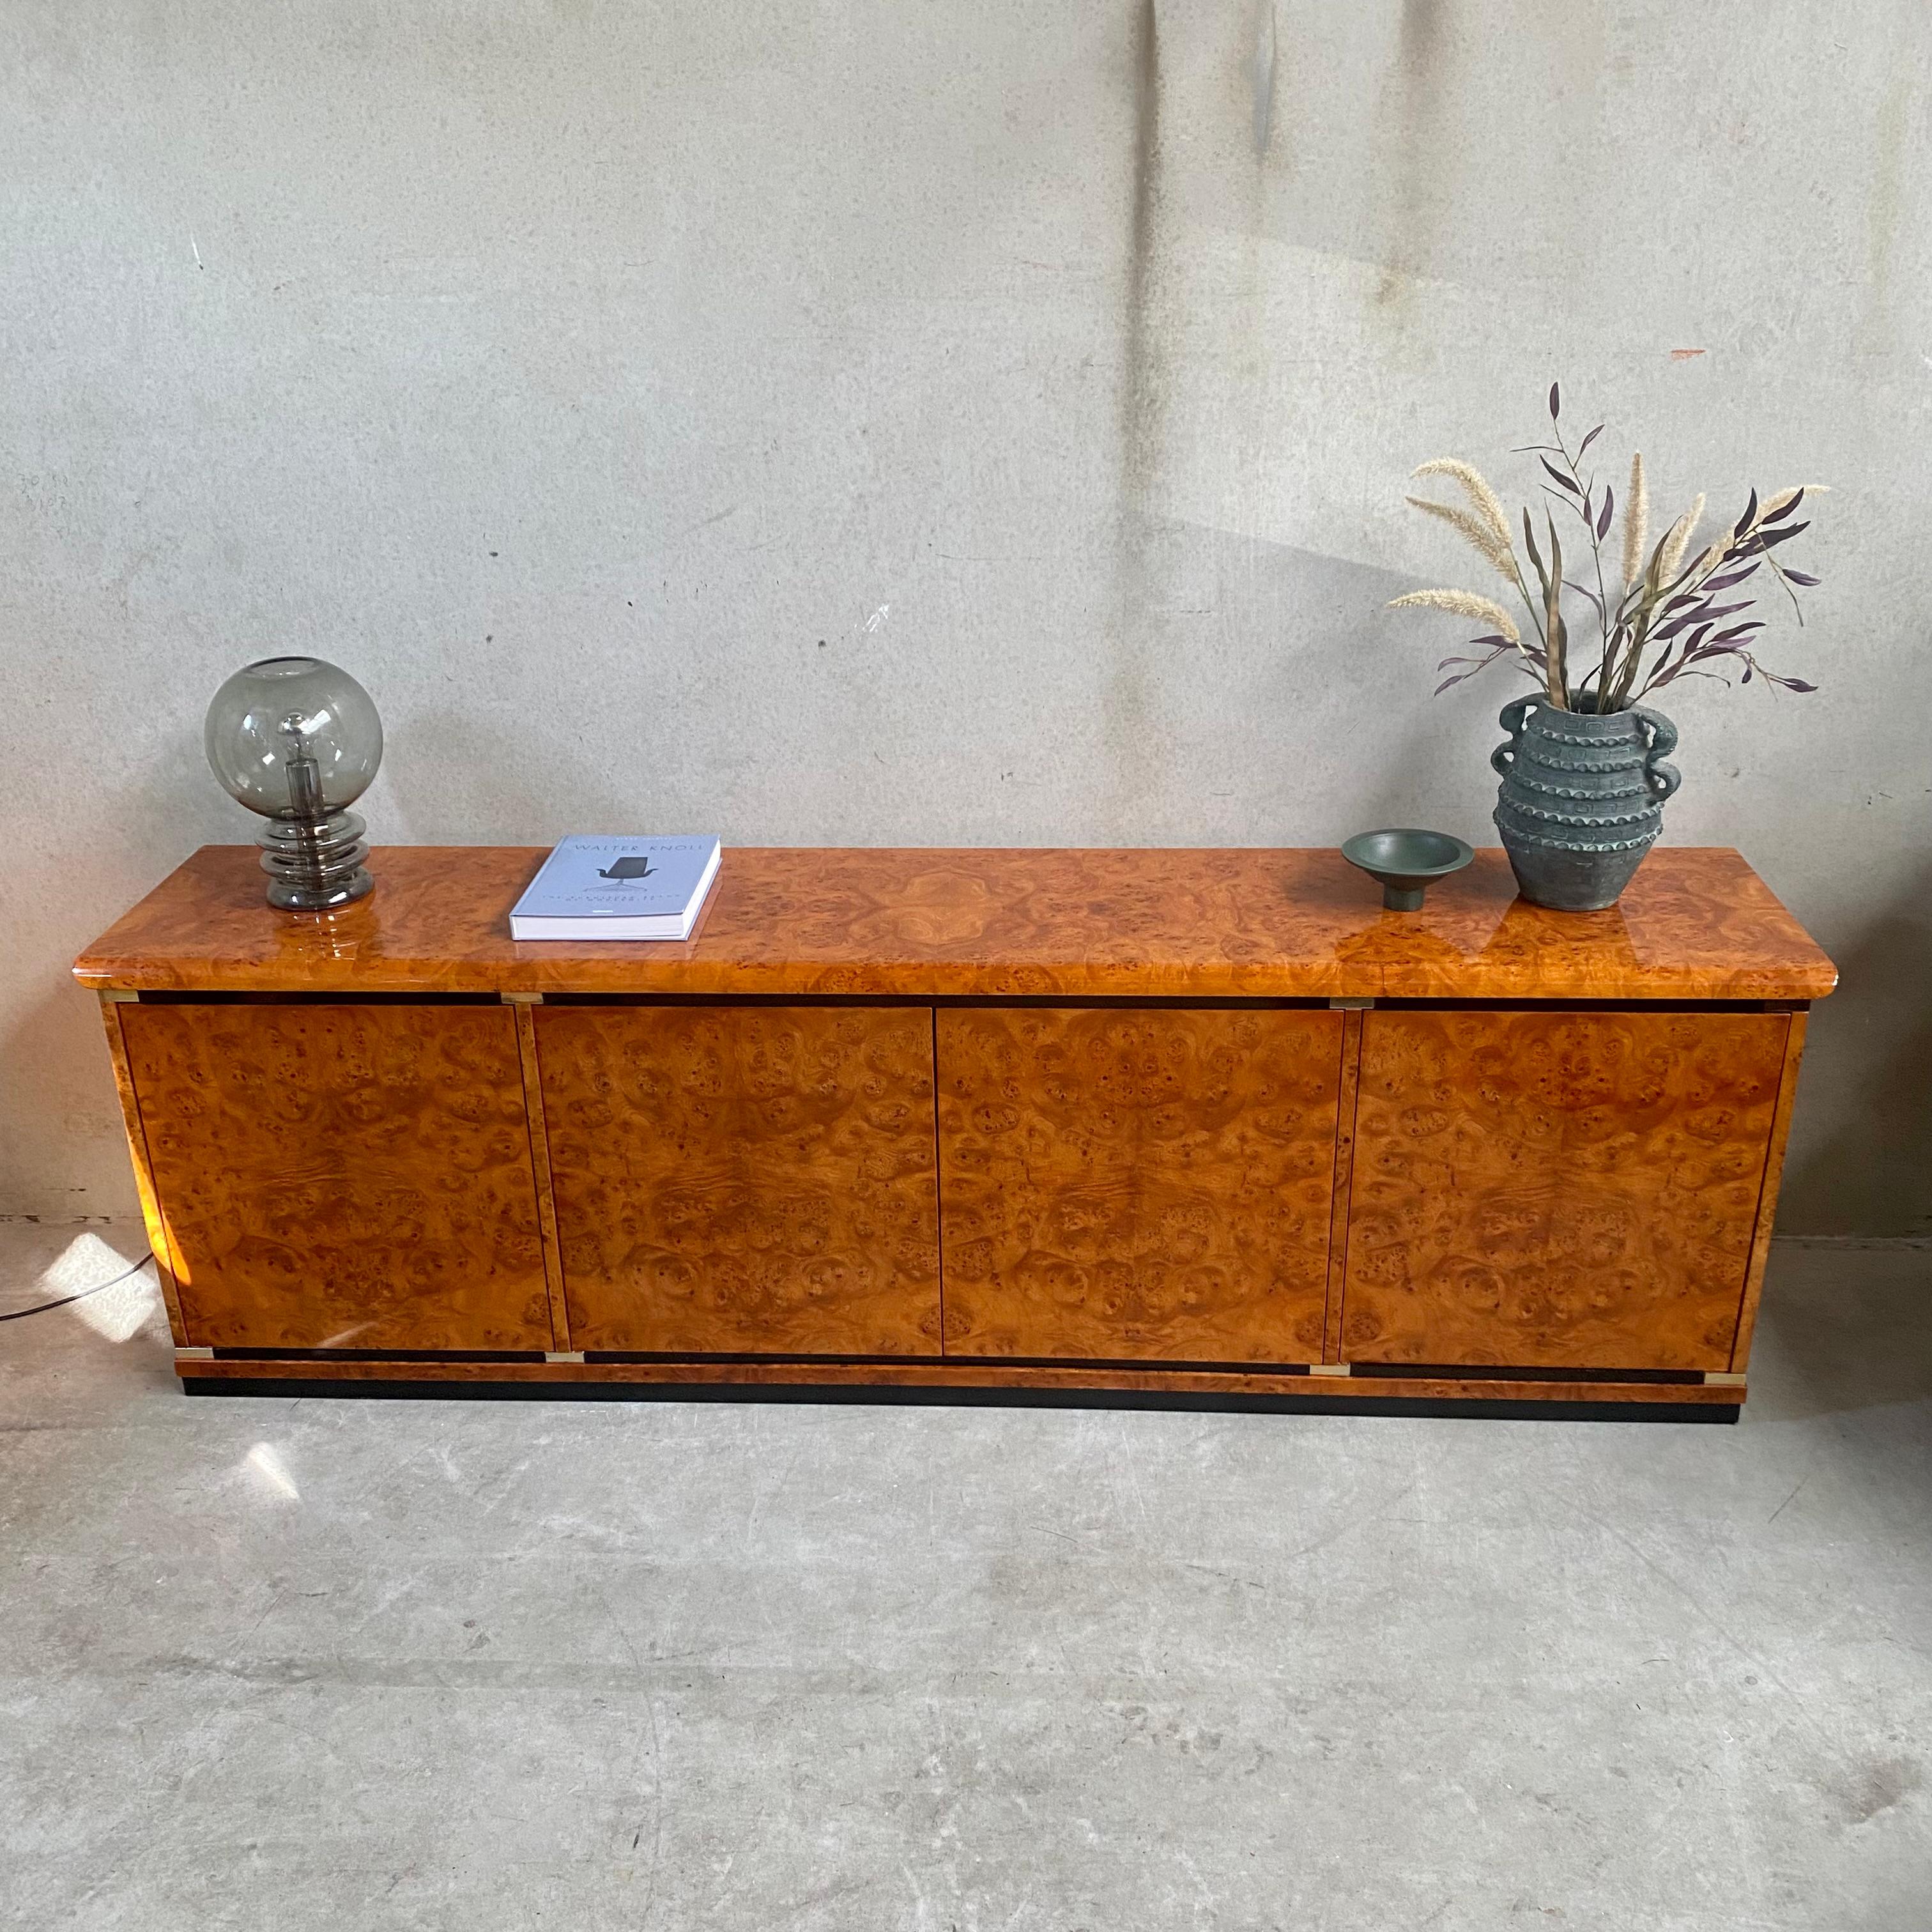 Briar Burl Wood Sideboard by Guerini Emilio for Gdm 24 Kt Gold Plated Italy 1980 For Sale 1